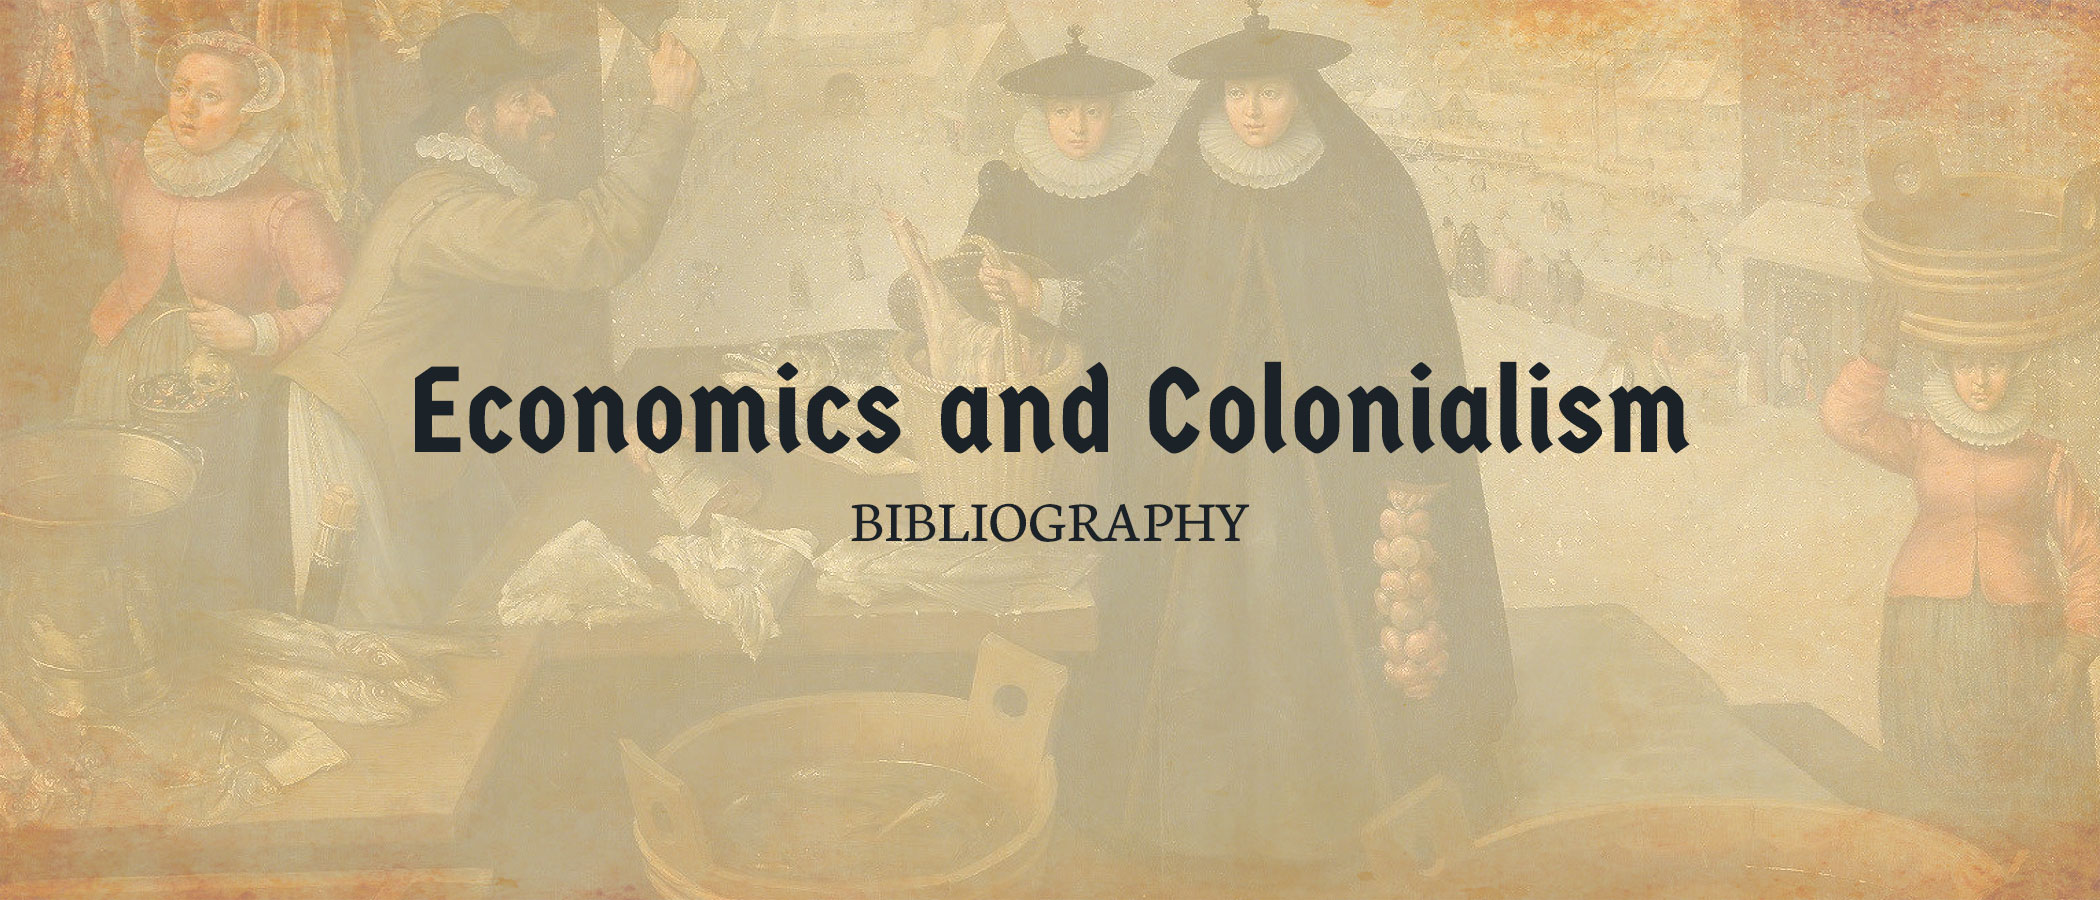 Bibliography 08: Economics and Colonialism